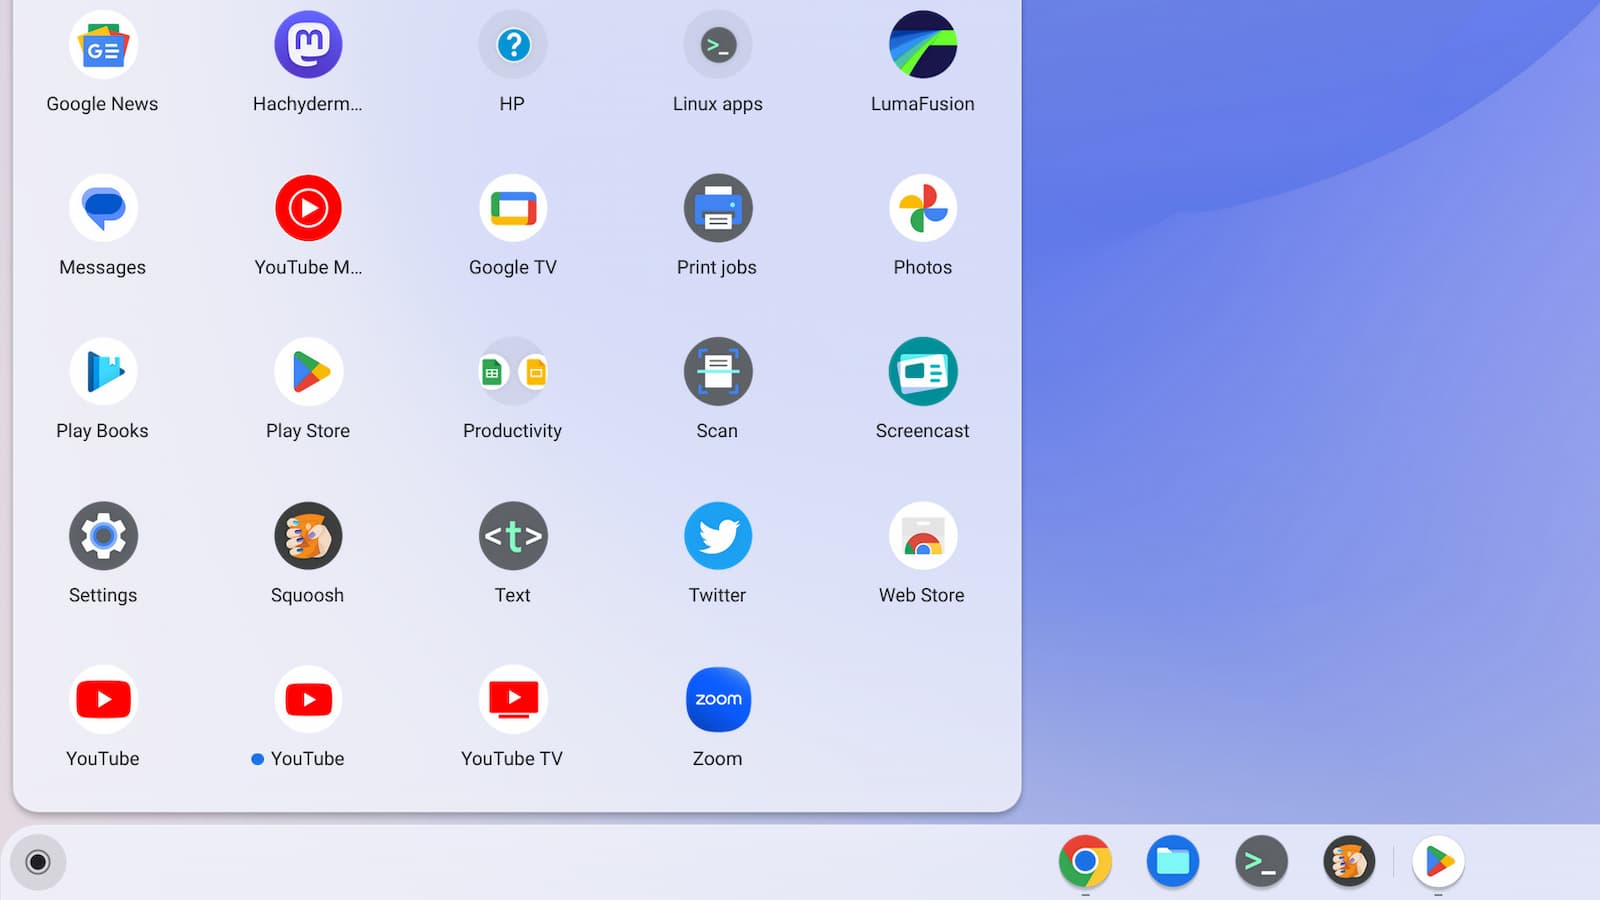 Two ChromeOS apps for YouTube one is a web app and one is Android app